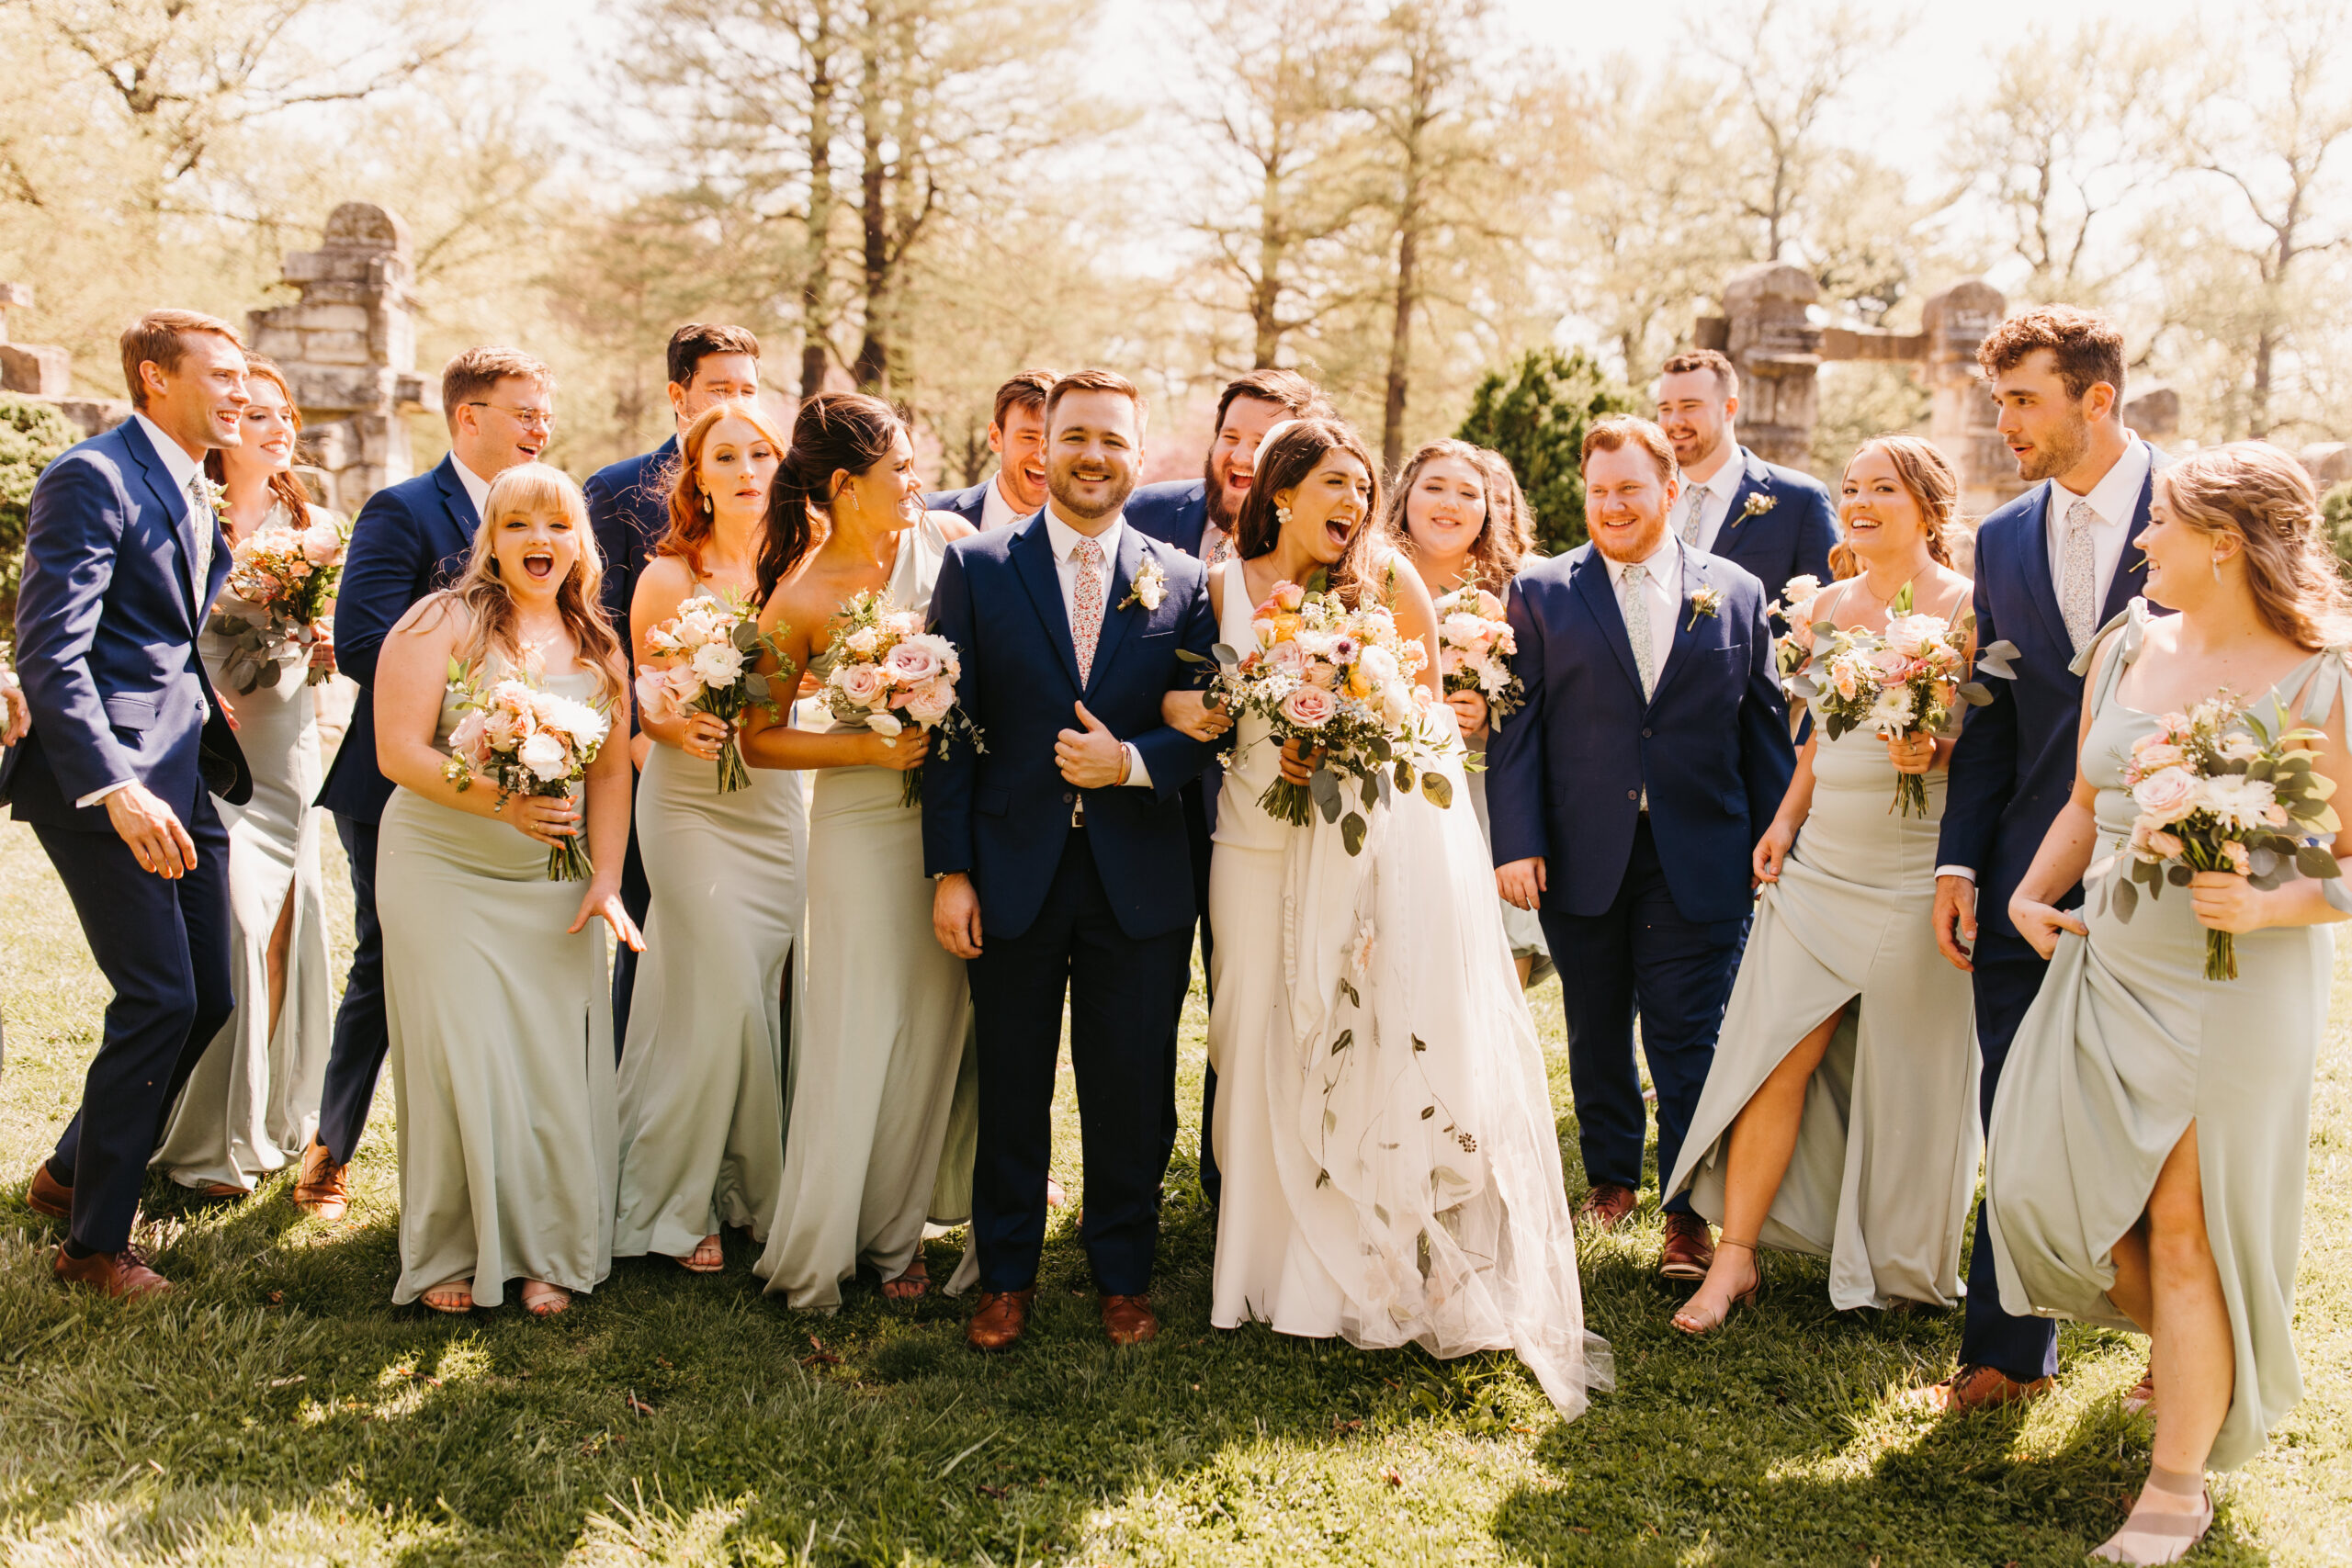 Colorful spring wedding in St. Louis, Missouri